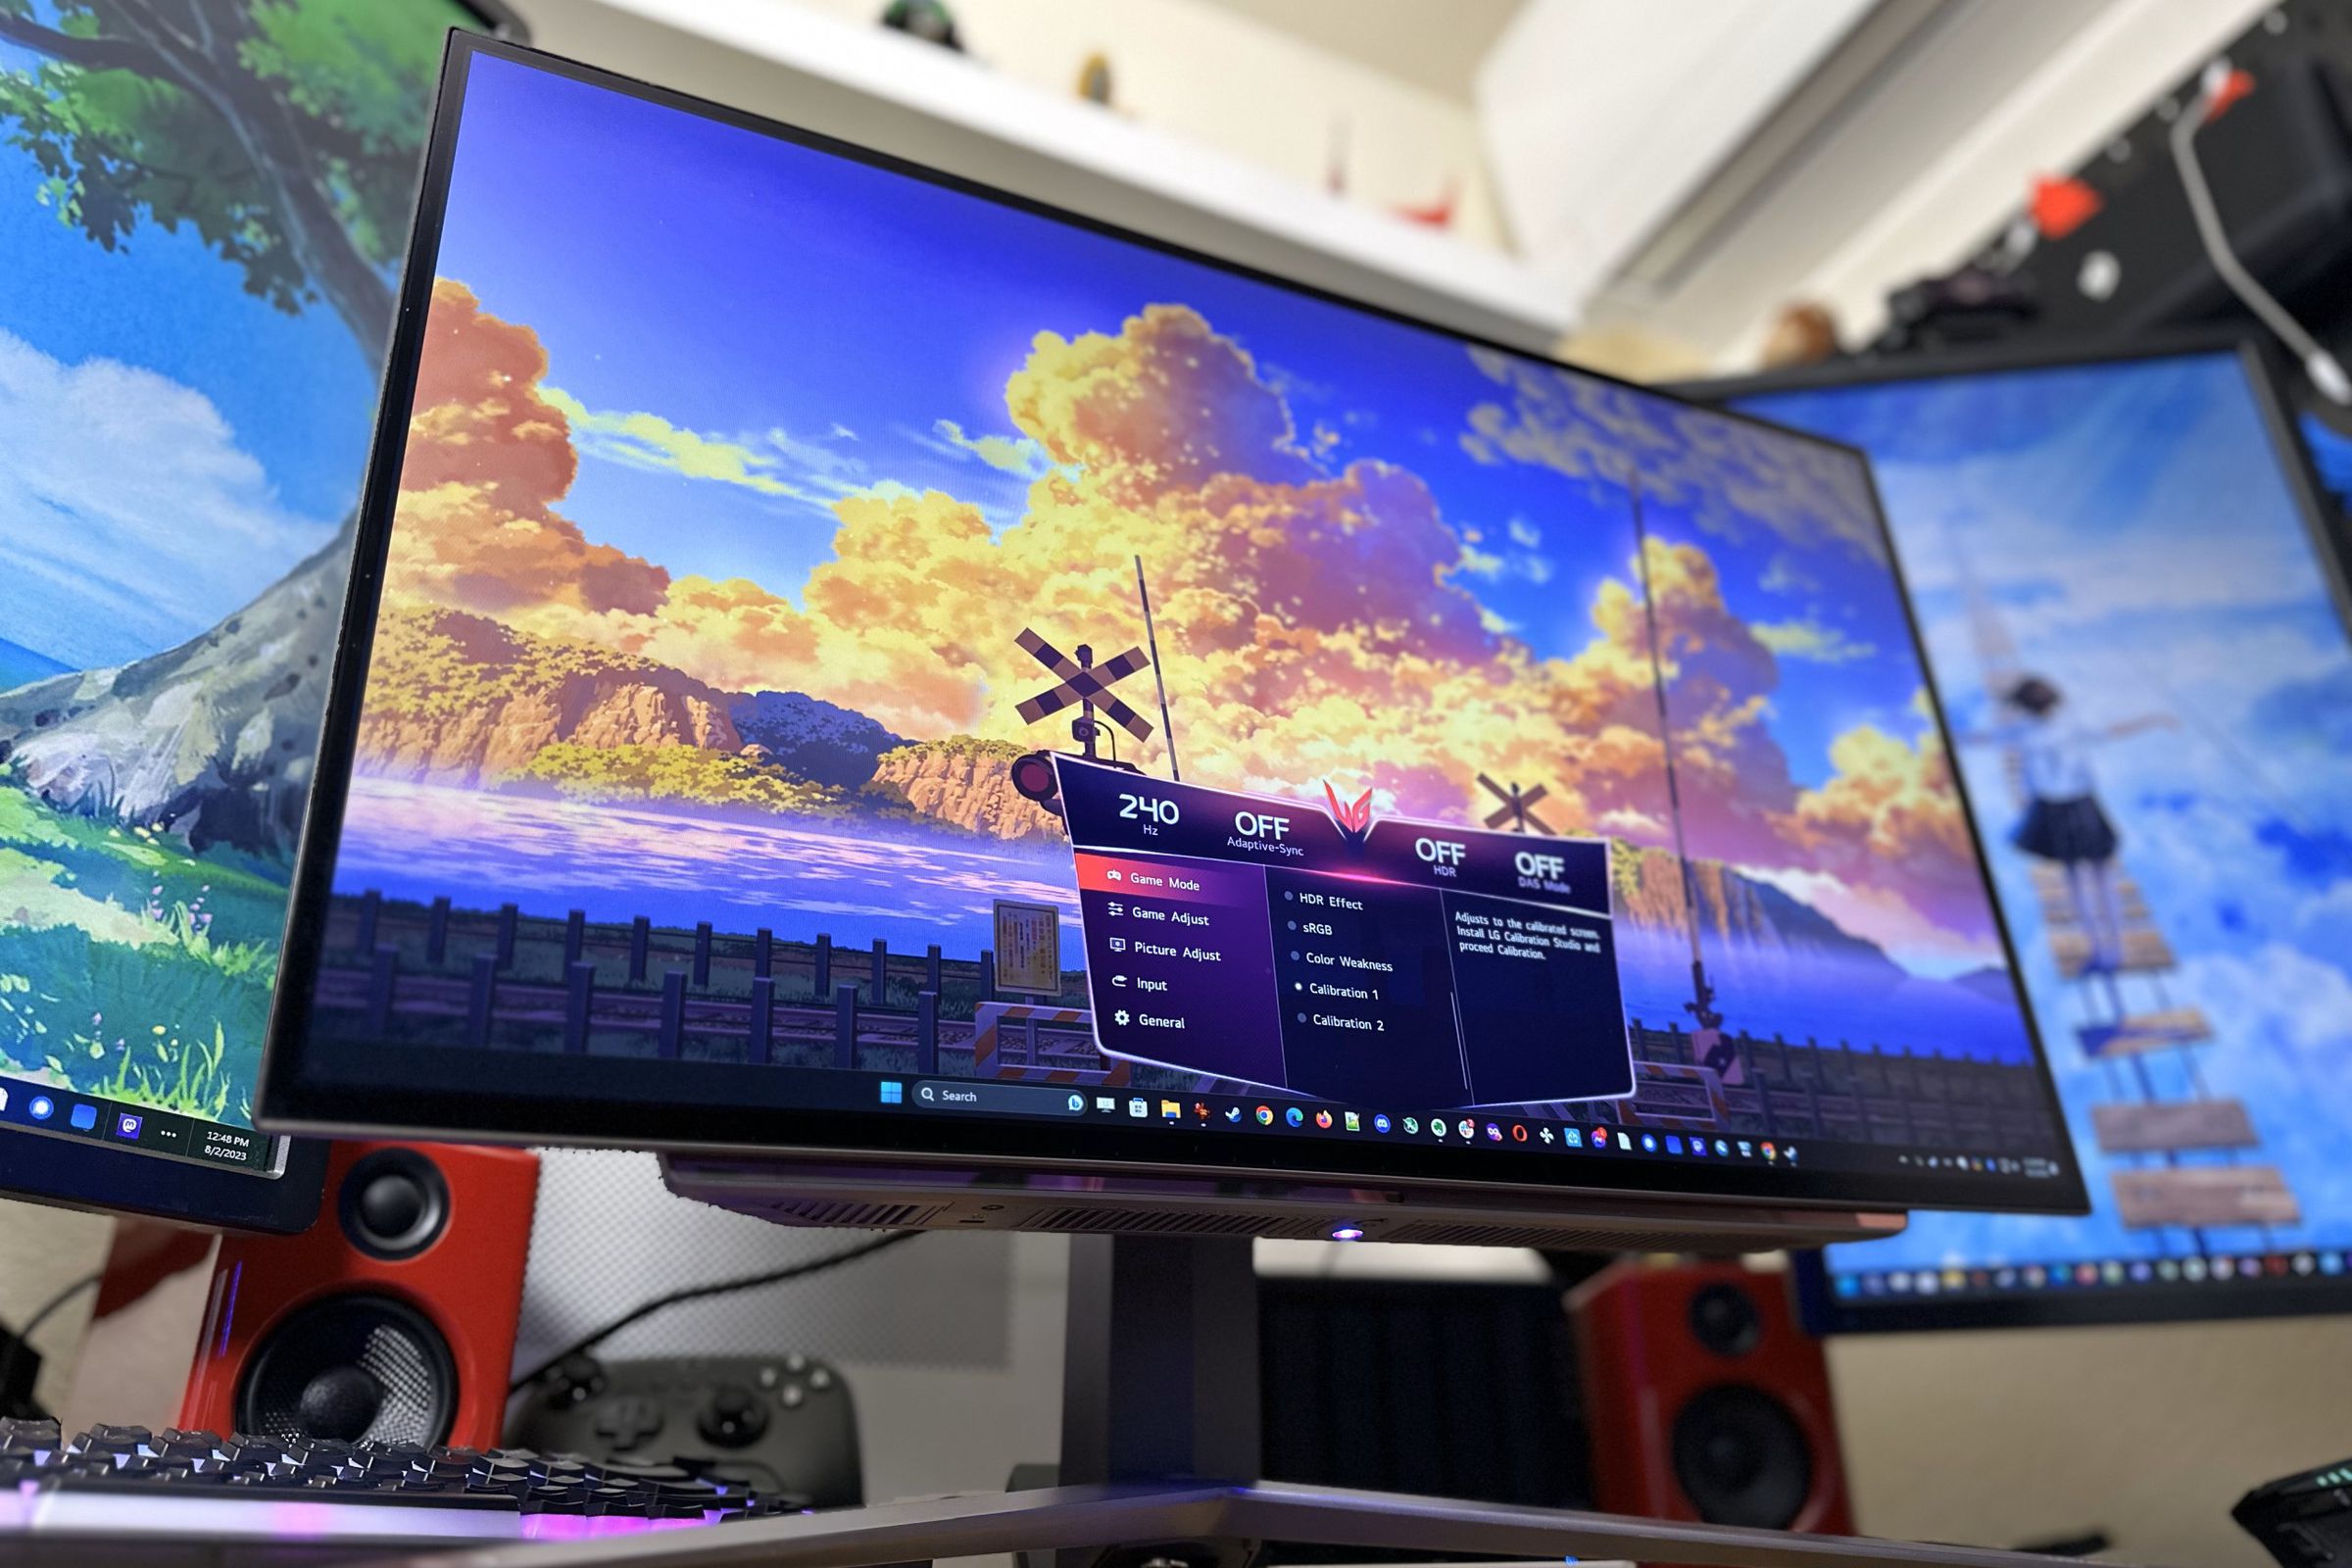 A bright, colorful OLED monitor with a big V-shaped stand underneath, flanked by two other monitors in portrait mode. The main monitor has a colorful sky on screen with big orange sunset-lit clouds and an on-screen display showing it’s running at 240Hz.